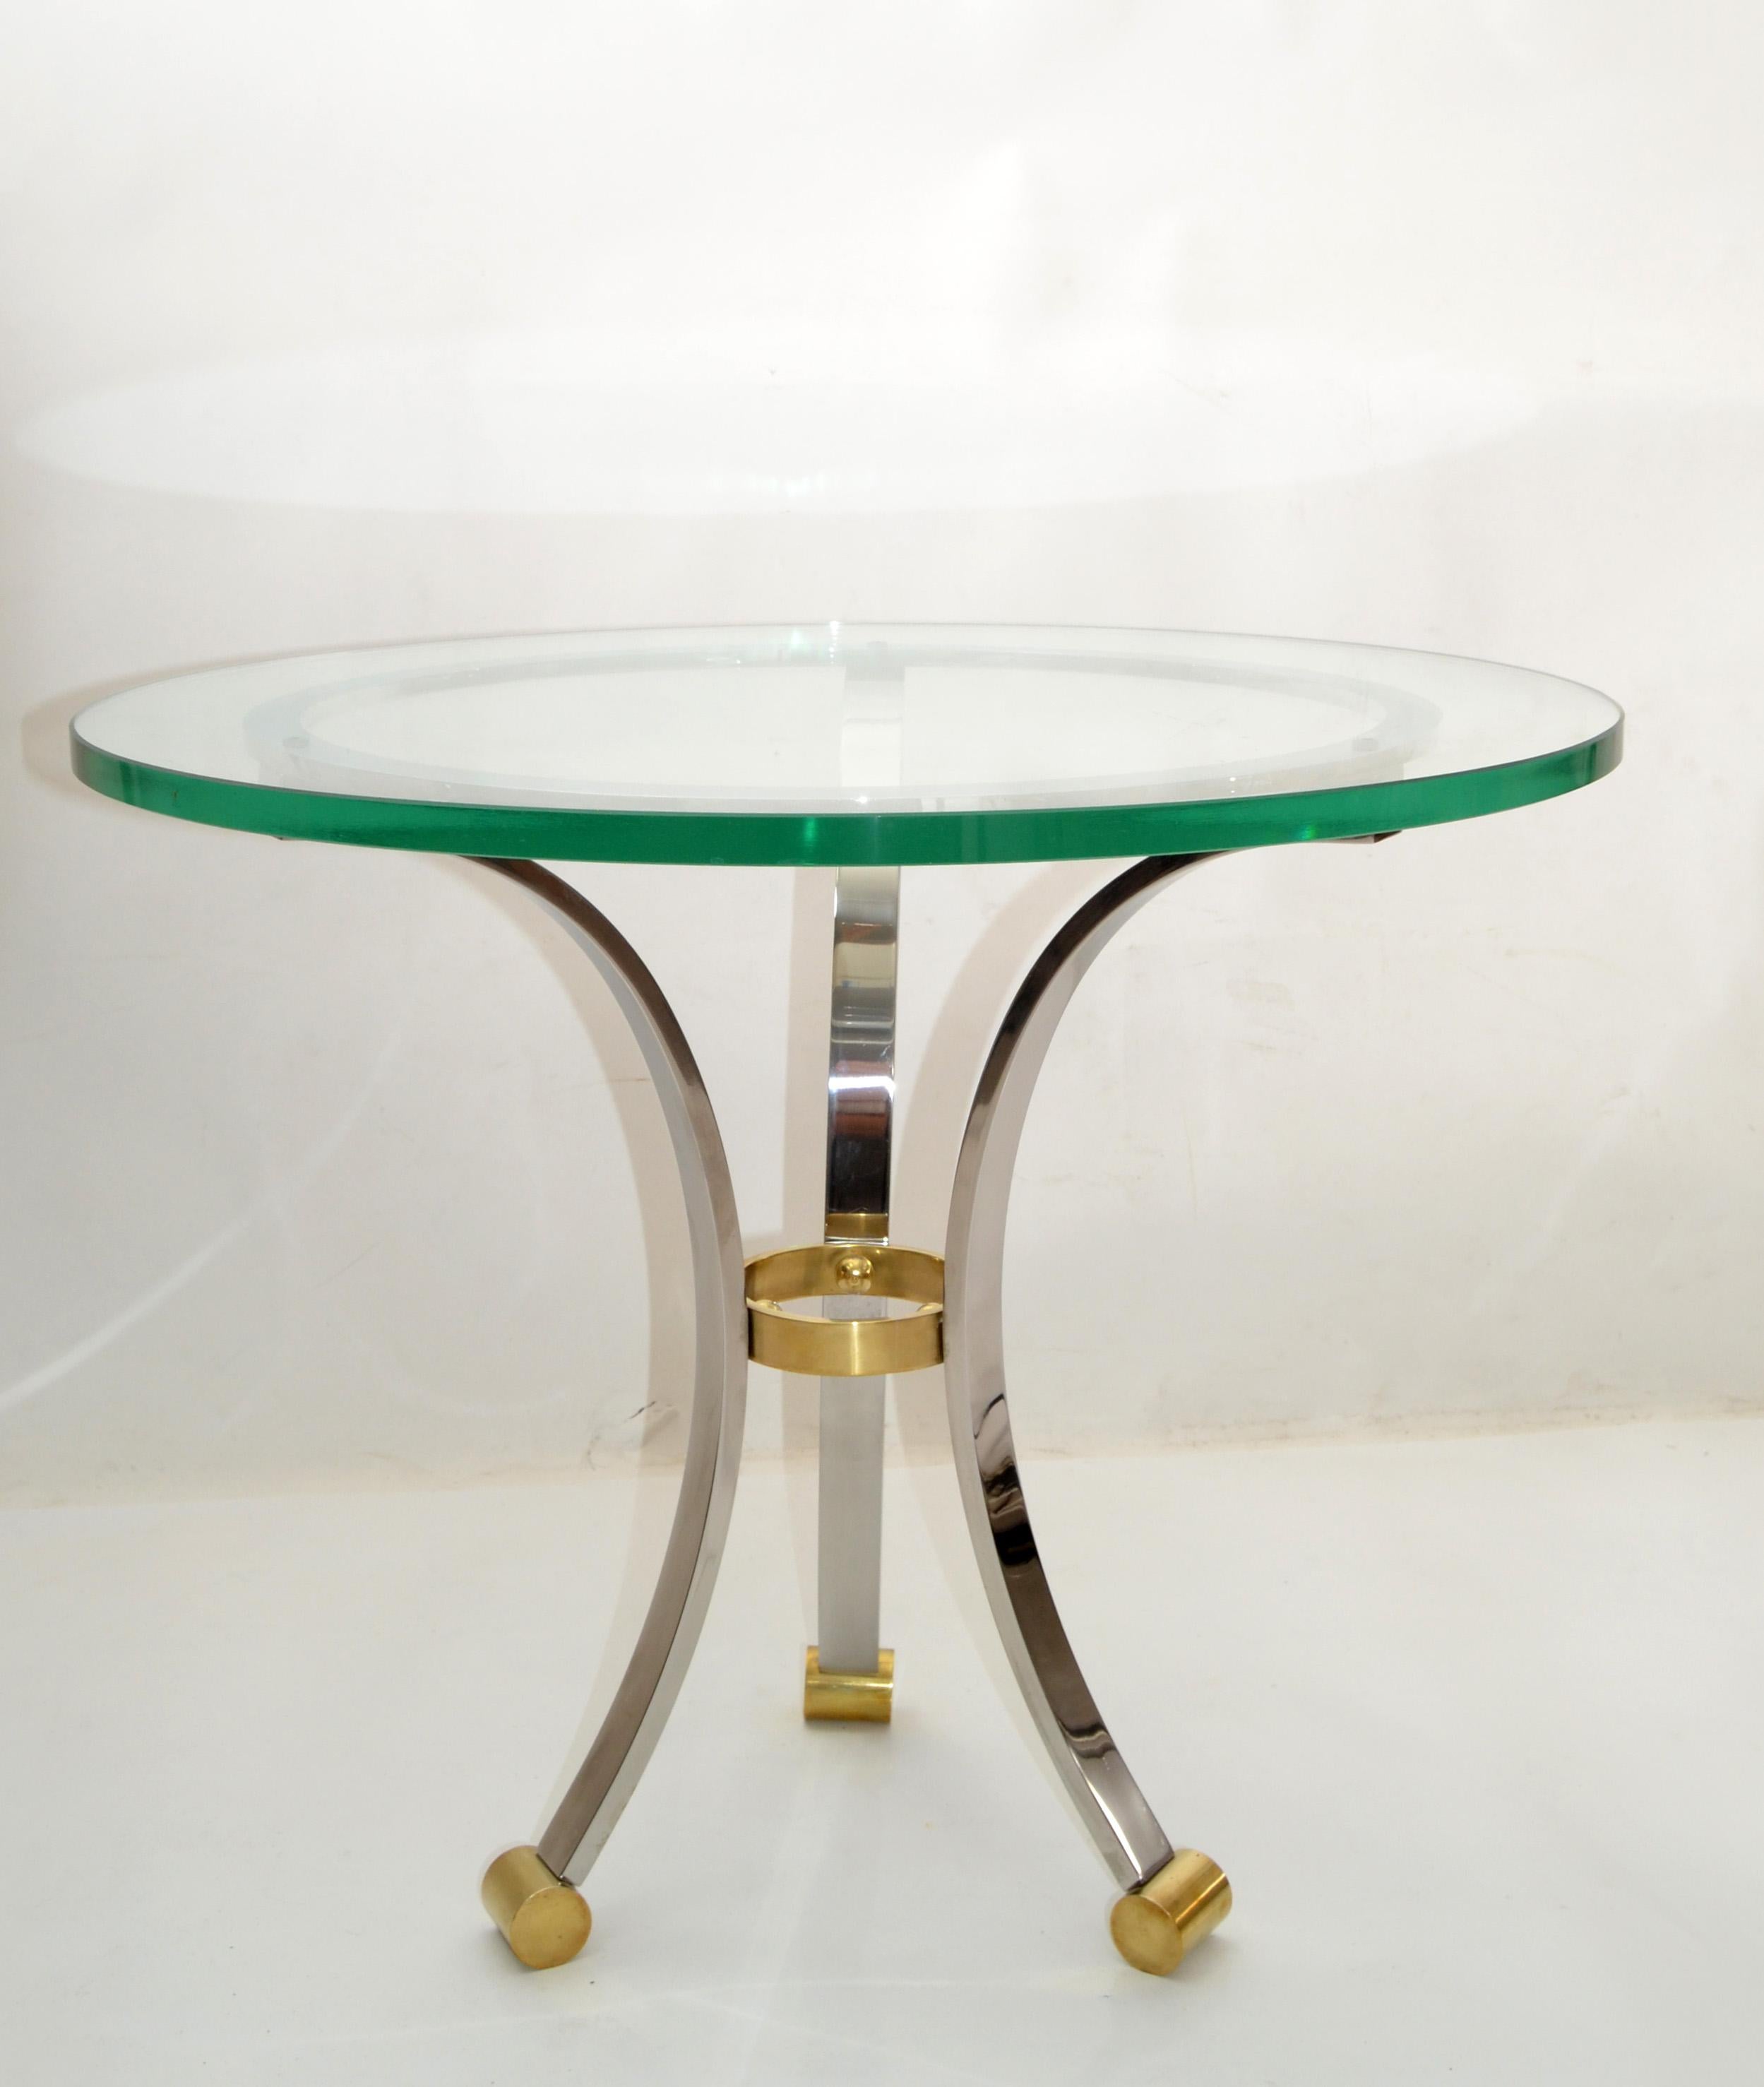 French Maison Jansen Round Glass, Brass & Steel Coffee Table Neoclassical, 1960s For Sale 10